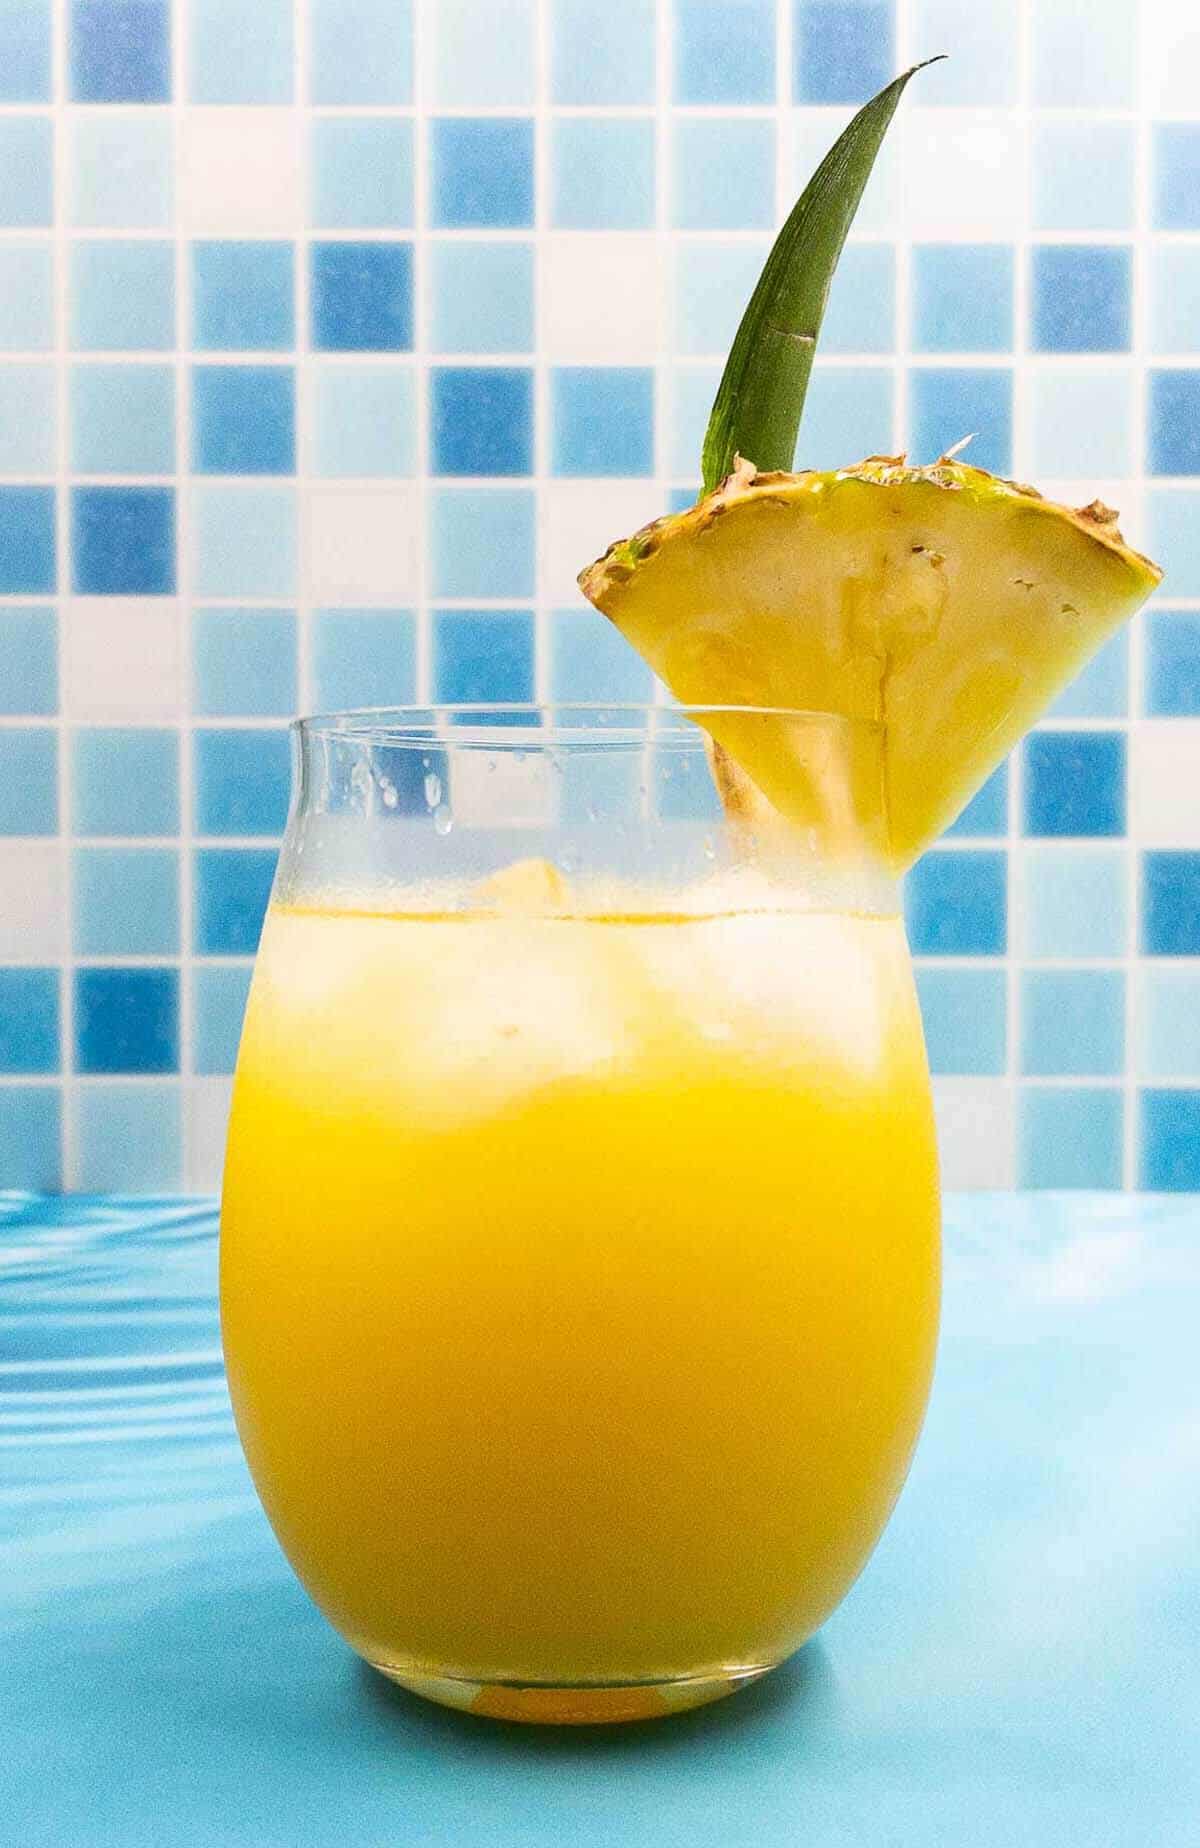 A homemade pineapple tequila cocktail with a wedge of pineapple garnish.